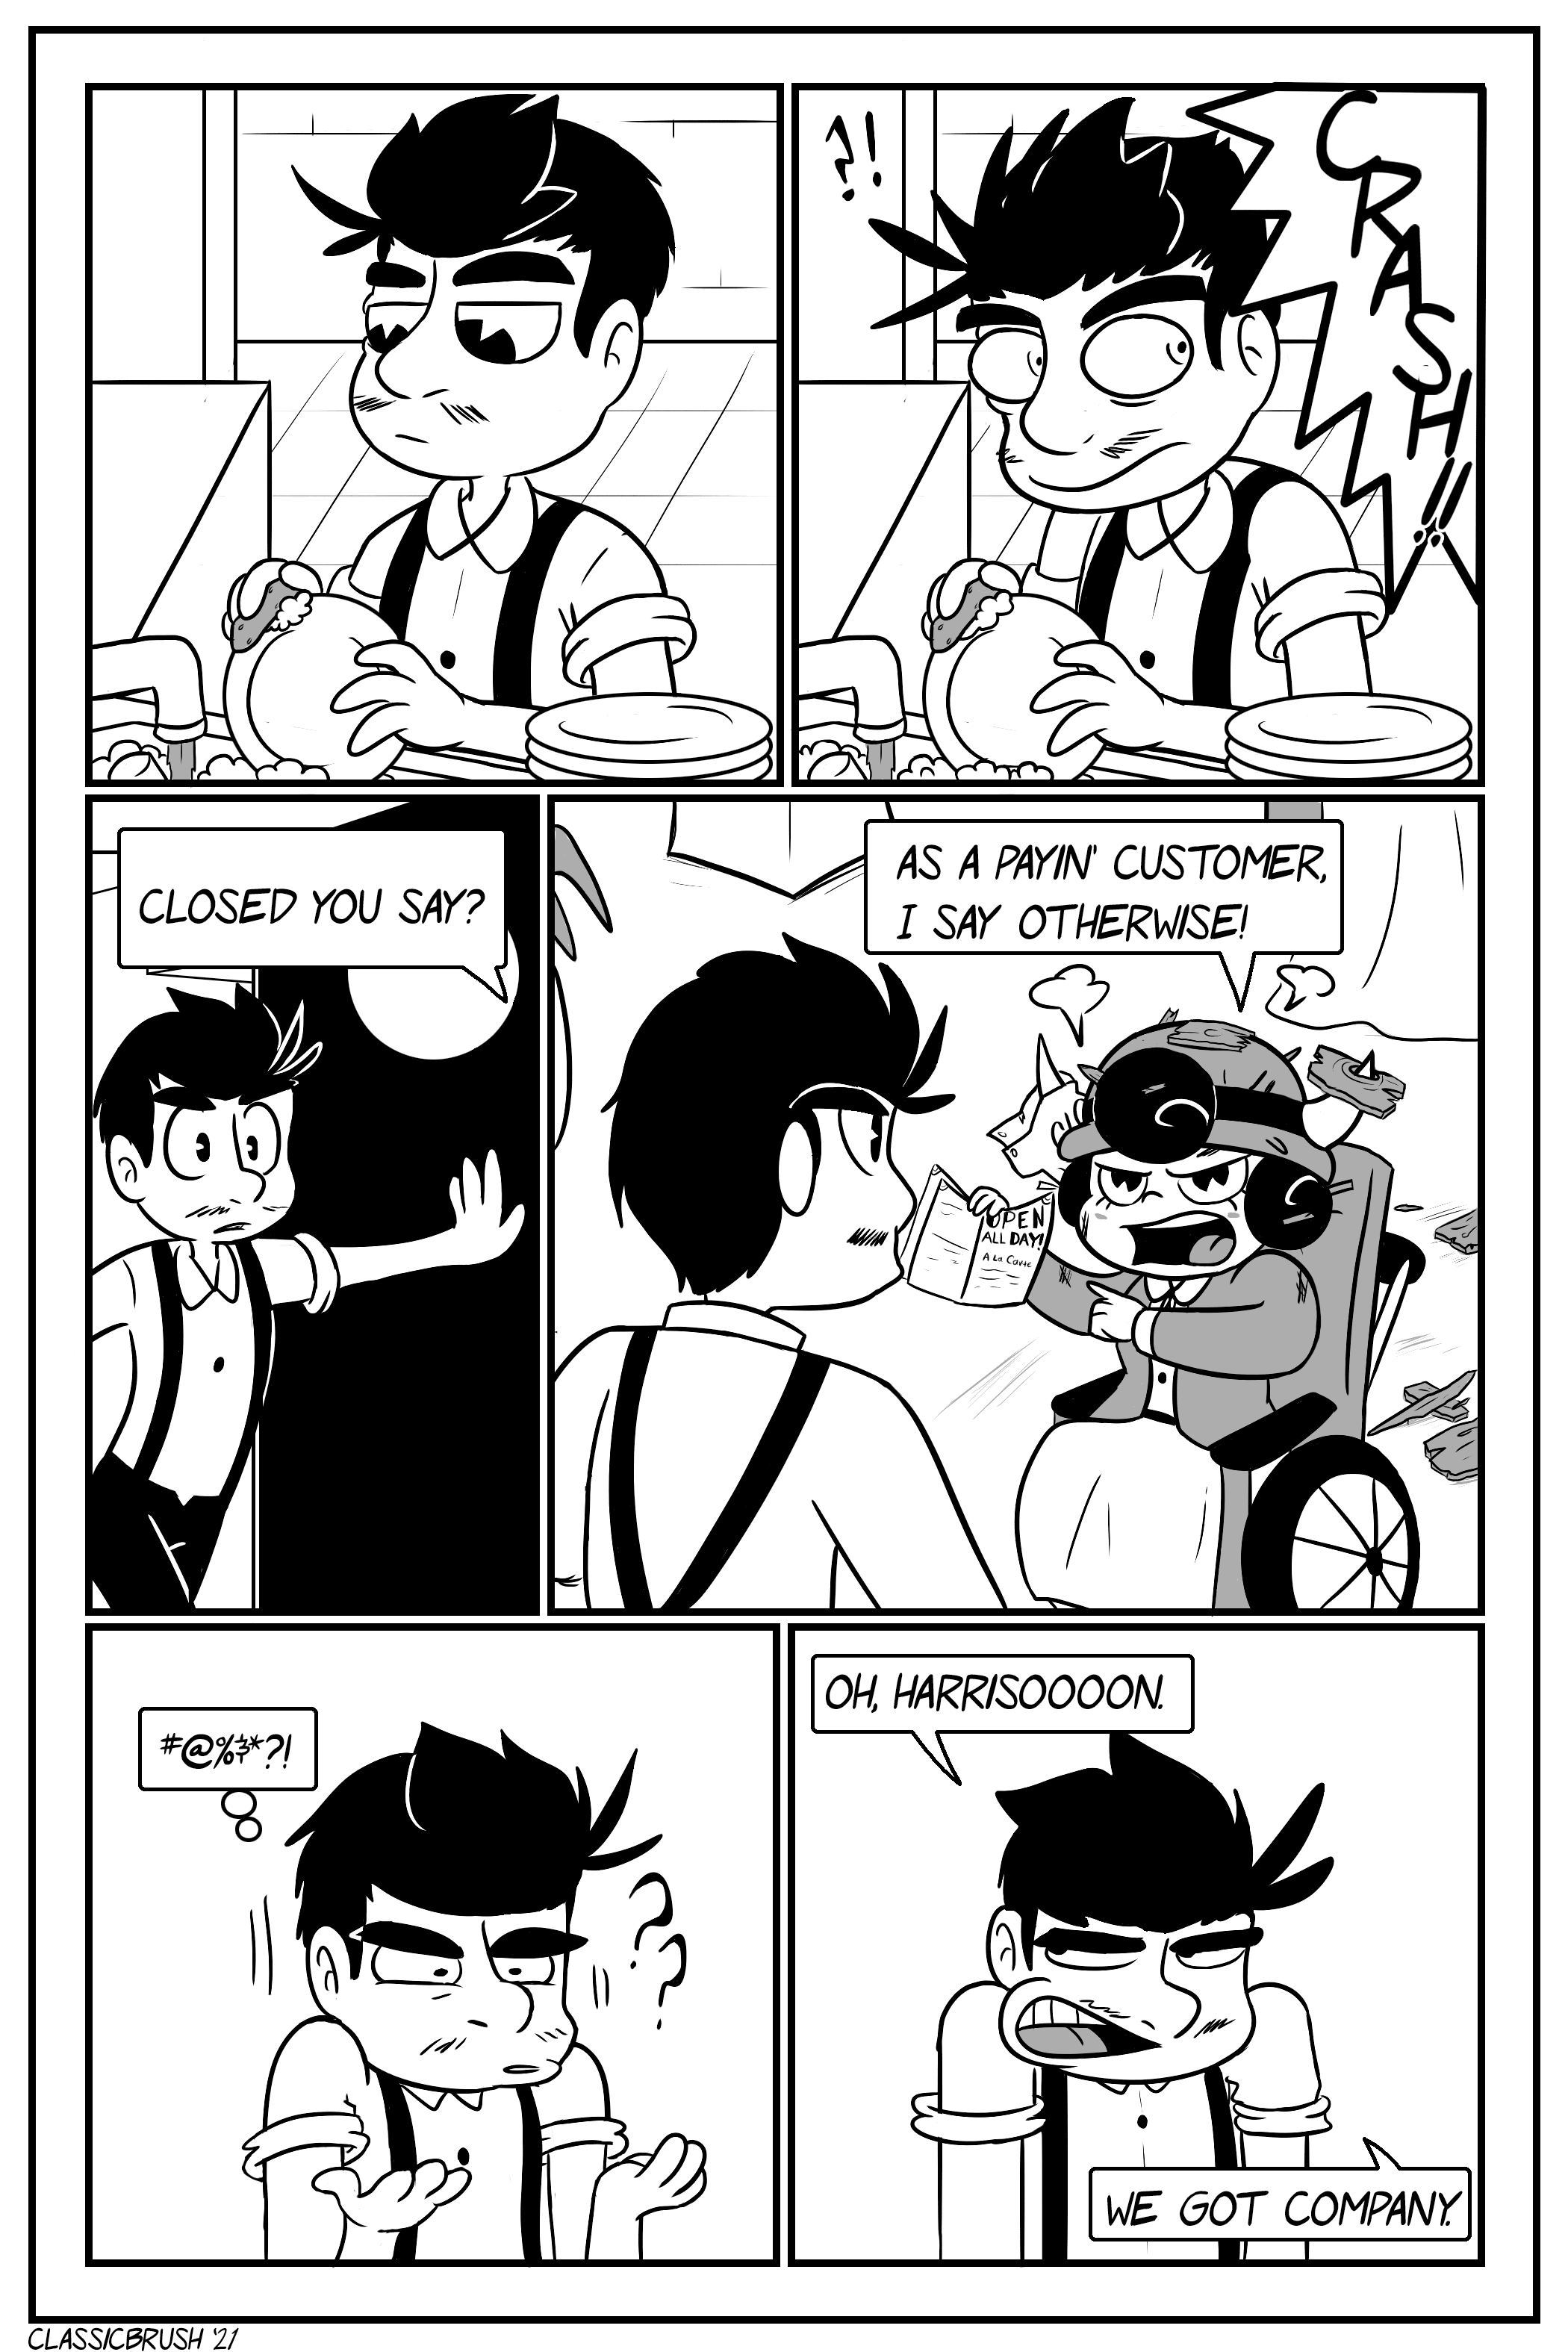 Panel 1: Jonny is seen doing dishes in the kitchen. Panel 2: A large â€œCRASH!â€ is heard, startling Jonny. Panel 3: Jonny swings open the kitchen doors to the dining room while a voice states â€œClosed, you say?â€ Panel 4: Audrey is present, covered in wooden debris, pointing to the â€œOpen All Dayâ€ notice on the menu. â€œAs a payinâ€™ customer, I say otherwise!â€ Panel 5: Jonny is speechless and does not know what to say, utterly confused and thinking â€œ#@%&*?!â€ Panel 6: Grumpy, Jonny calls â€œOh, Harrisoooon.â€ â€œWe got company.â€